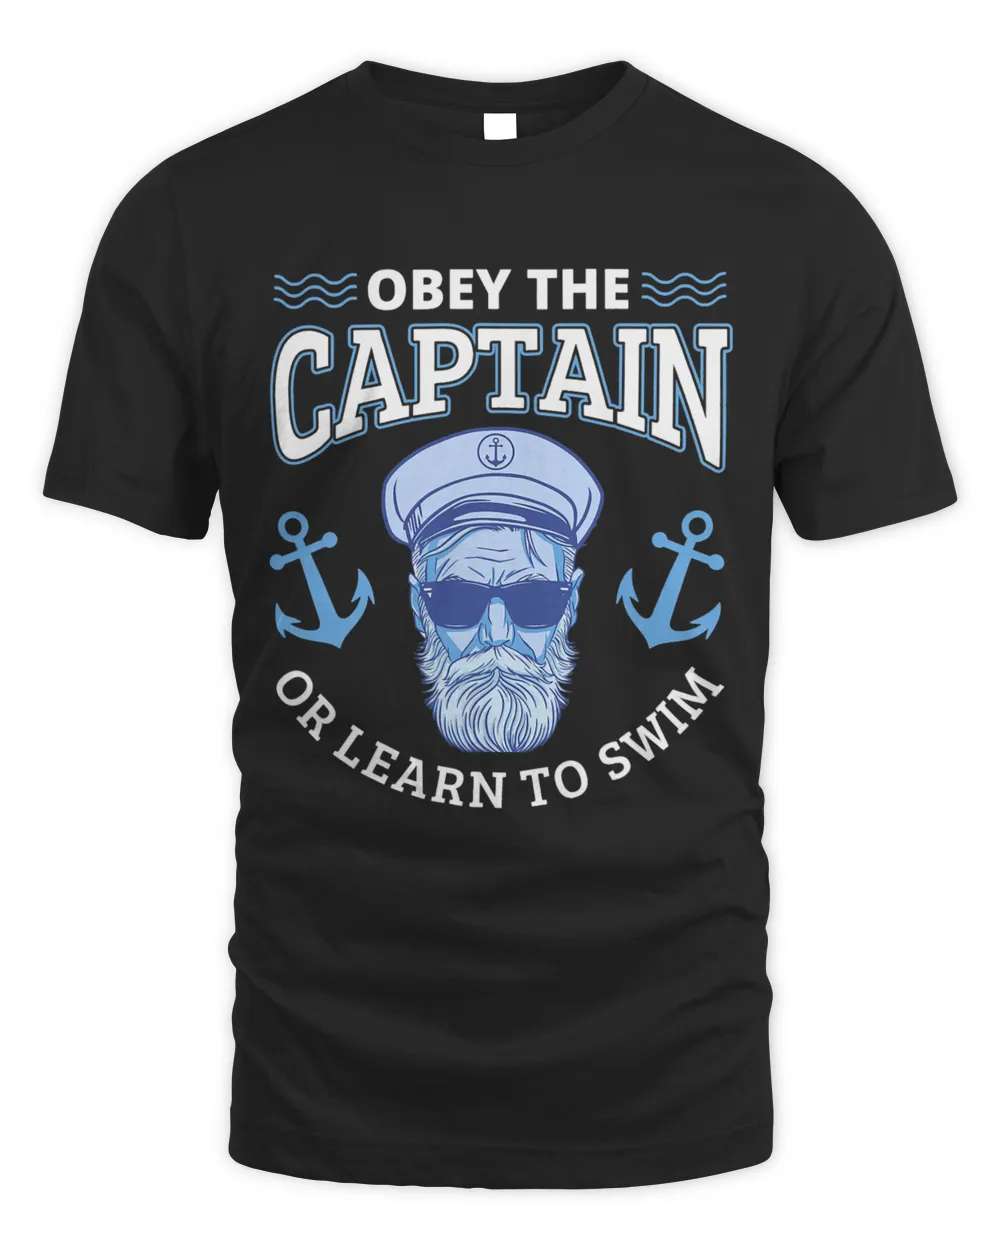 Obey The Captain Boater Funny Nautical Boating Boat